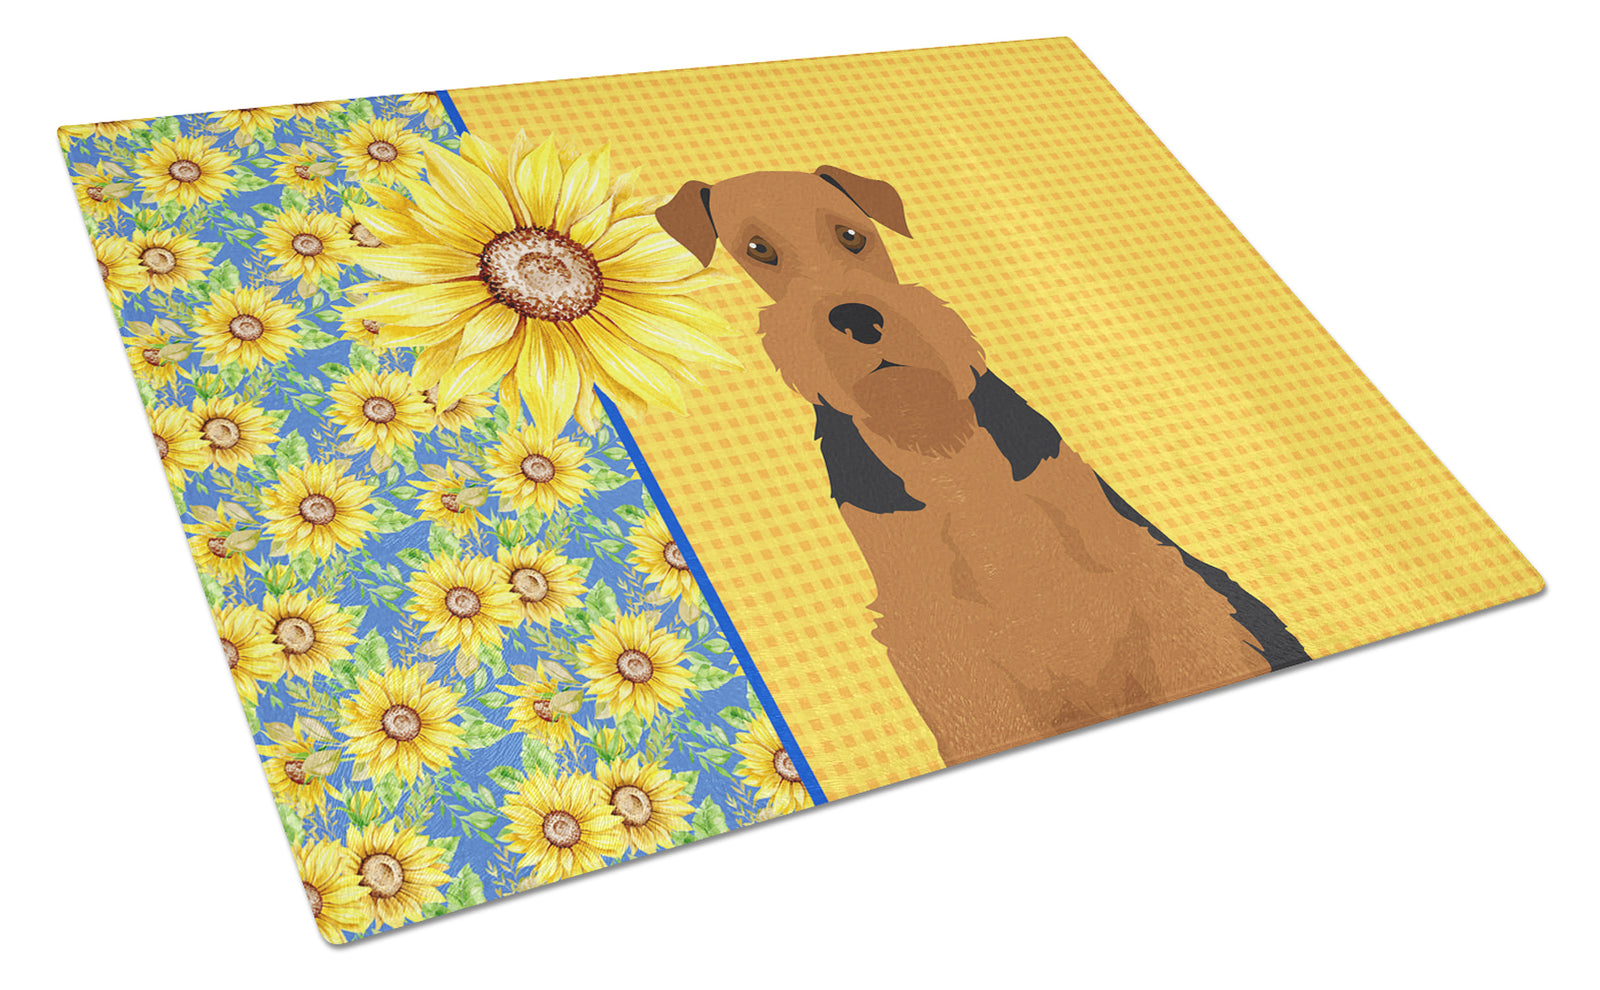 Buy this Summer Sunflowers Black and Tan Airedale Terrier Glass Cutting Board Large